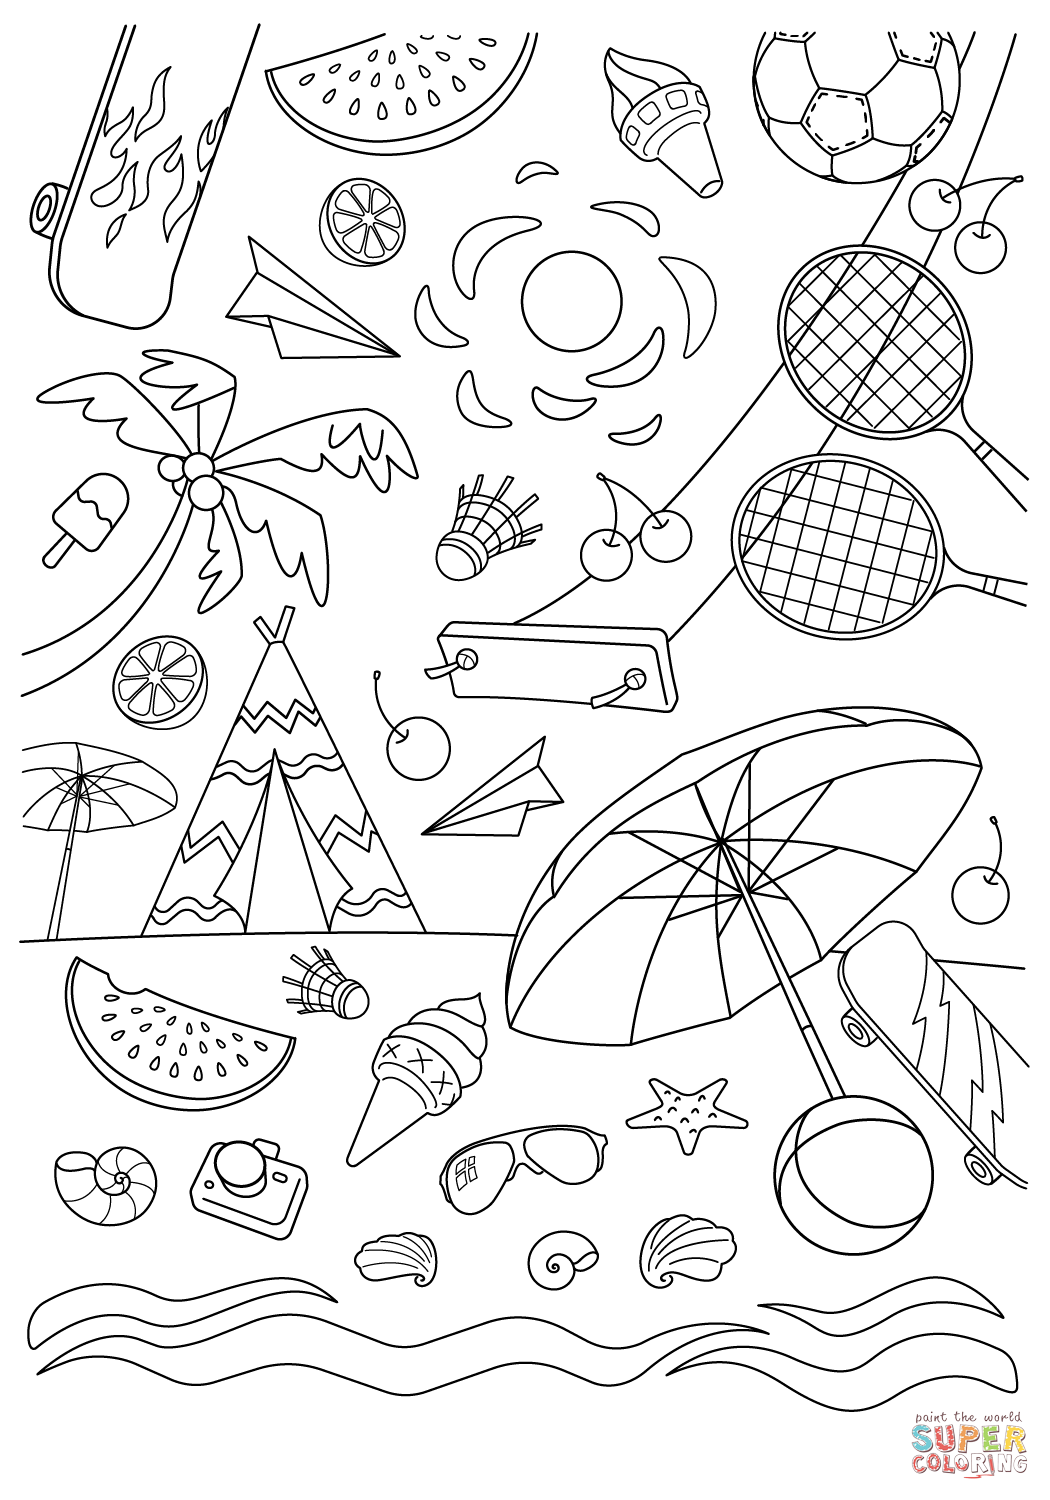 Summer activities coloring page free printable coloring pages